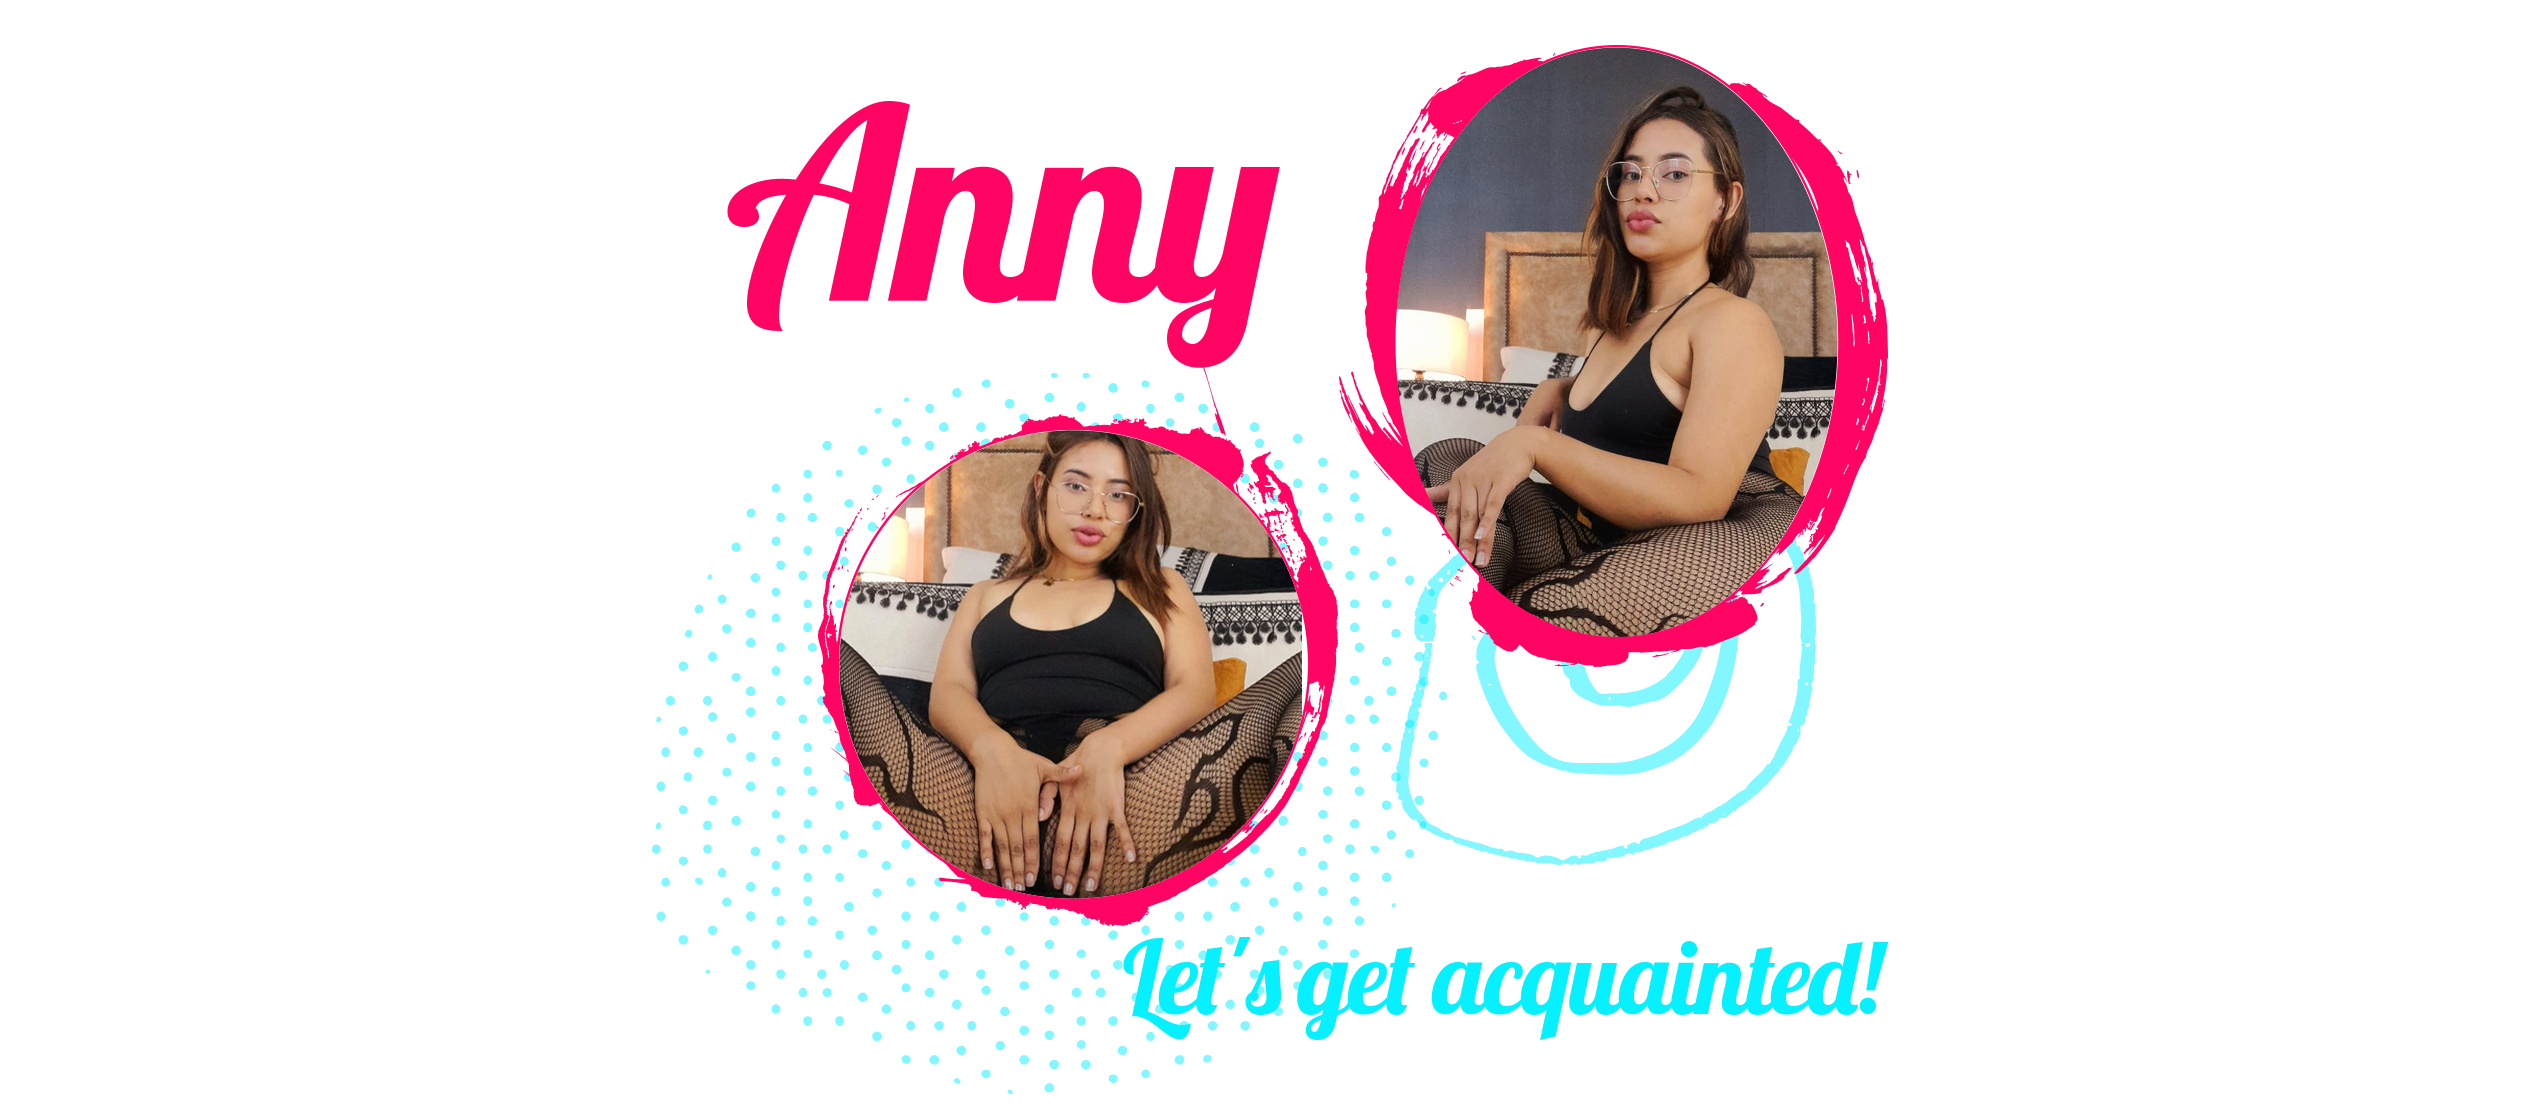 AnnyWass Hi! Welcome to my page! image: 1